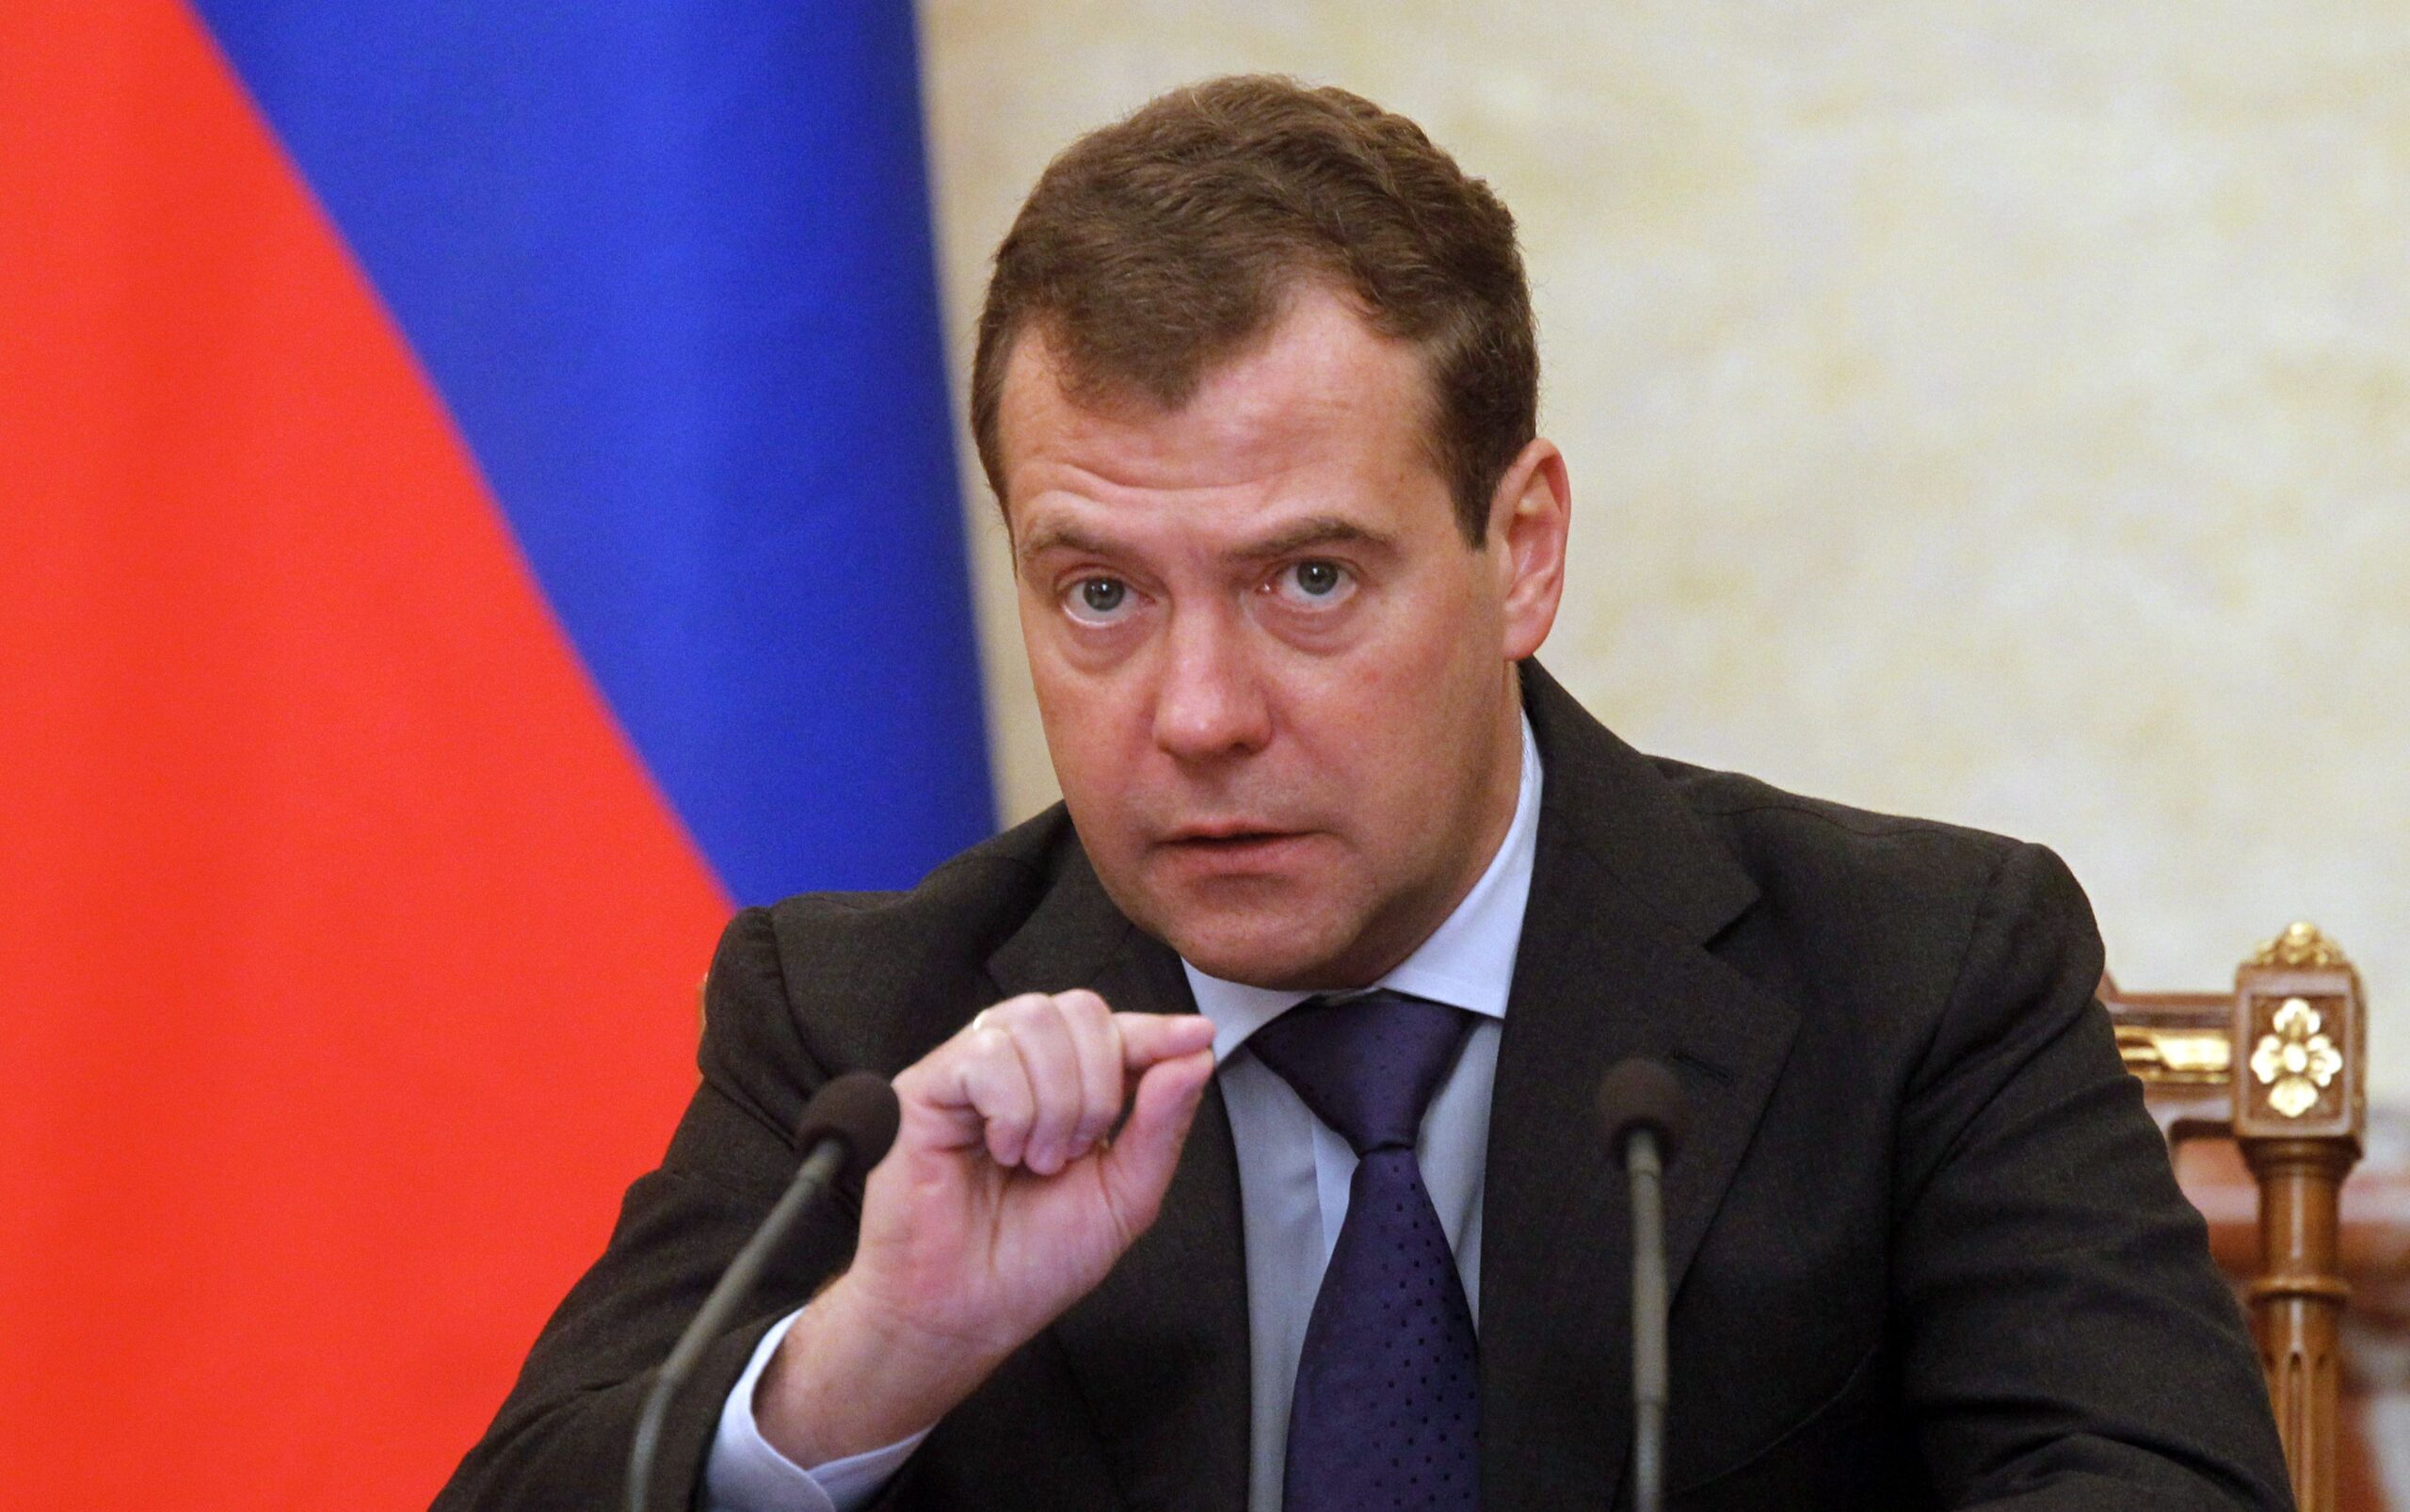 Poland would not survive a Russia-NATO war: Dmitry Medvedev